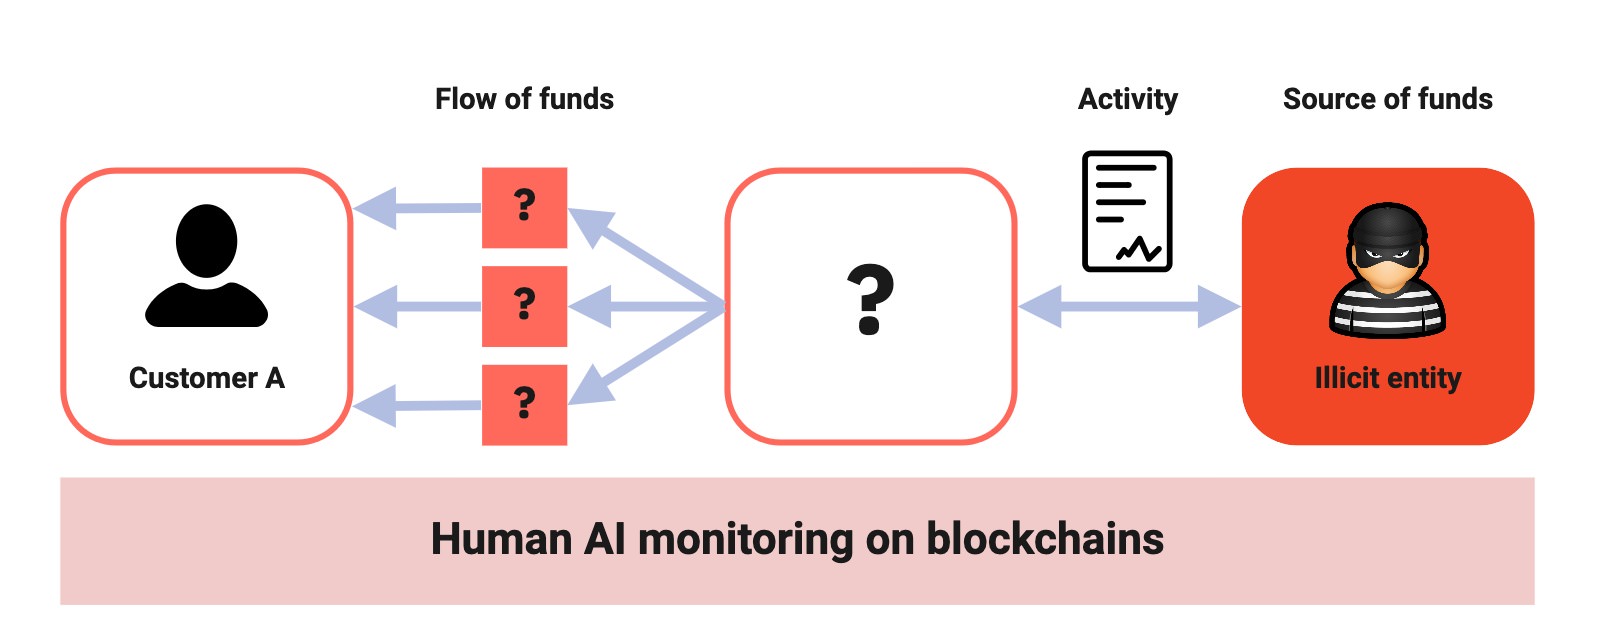 Diagram 3: In this scenario a known illicit entity exchanges stolen money for crypto via a smart contract. The receiving unknown party then tries to "layer" the money by transferring the money between various blockchain accounts and then ultimately transfers it to a known KYC'ed customer of a financial institution  on blockchain. The financial institution can see the complete story because the AI has access to the complete flow of funds and activities.